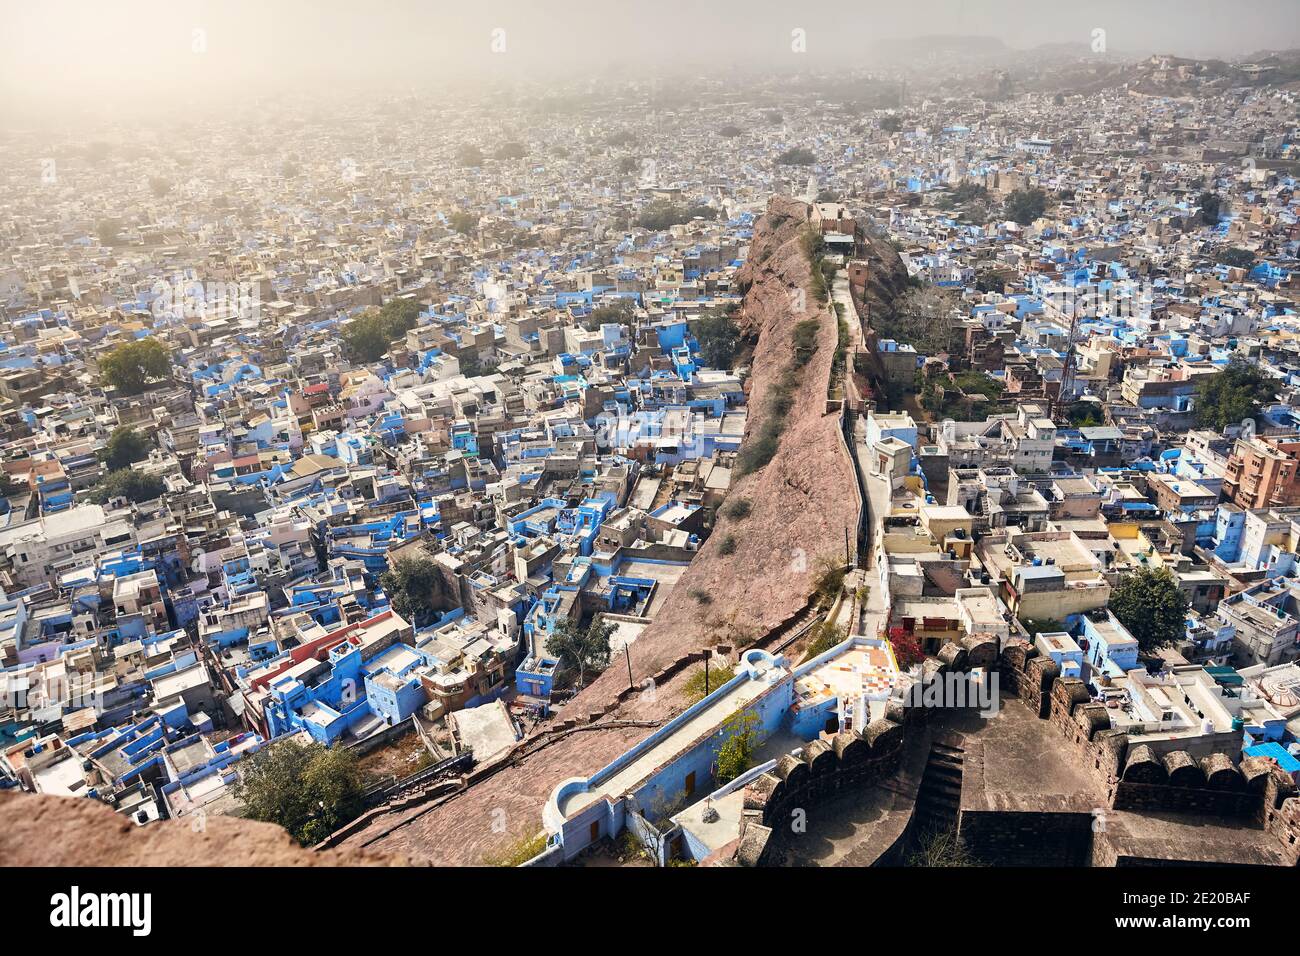 Aerial view of Blue city from Mehrangarh fort in Jodhpur, Rajasthan, India Stock Photo